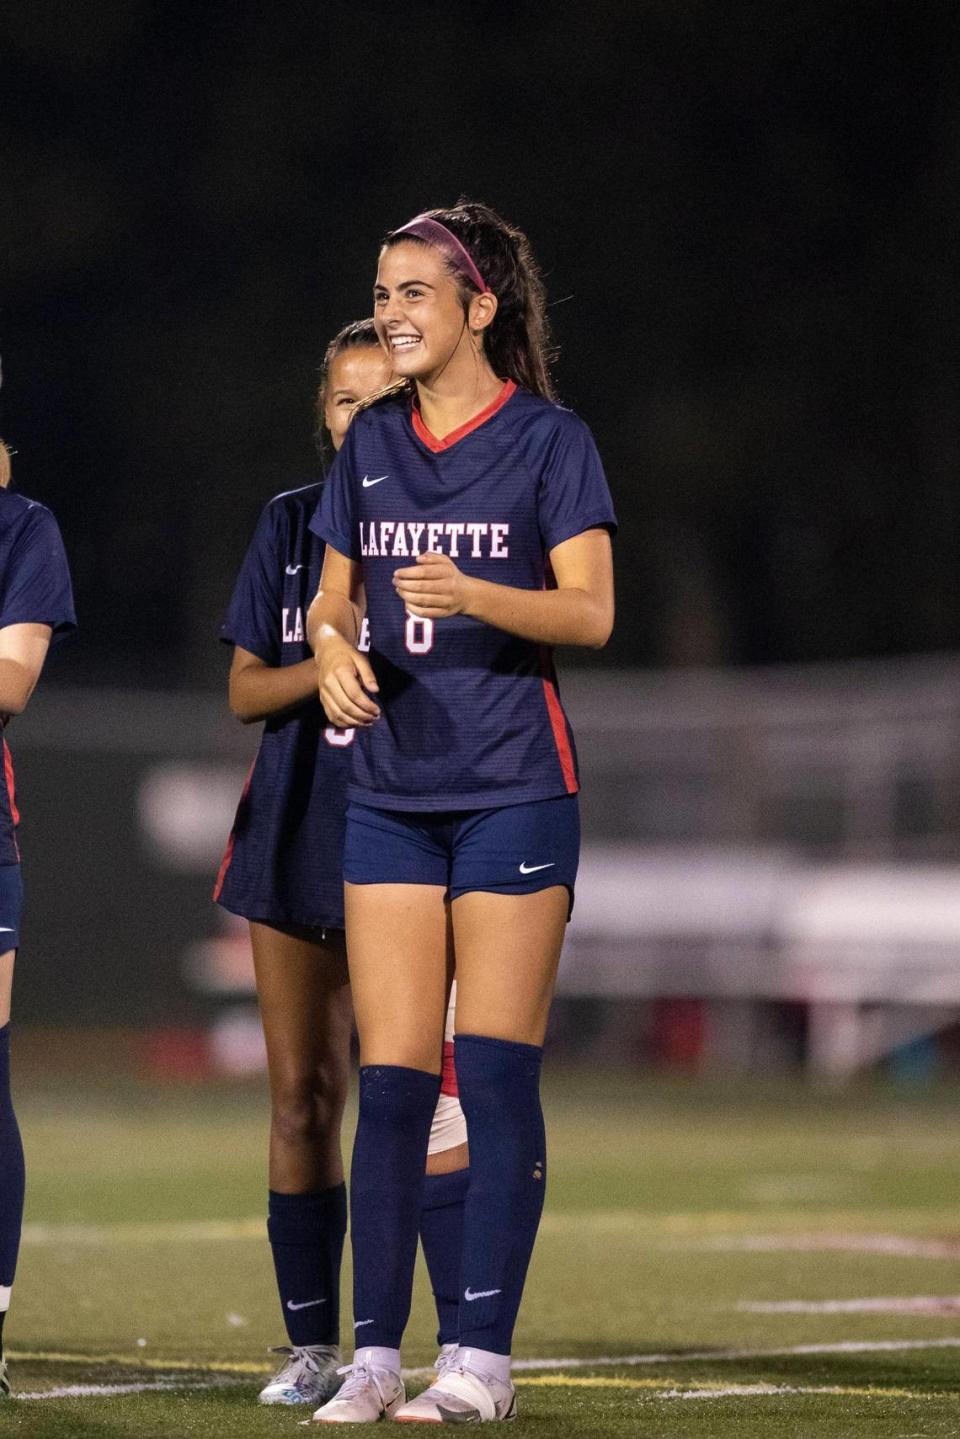 Brooke Dawahare, one of the top girls’ soccer players in the state, will skip her junior season at Lafayette High School after an offseason playing for Racing Louisville’s youth academy club. Silas Walker/swalker@herald-leader.com